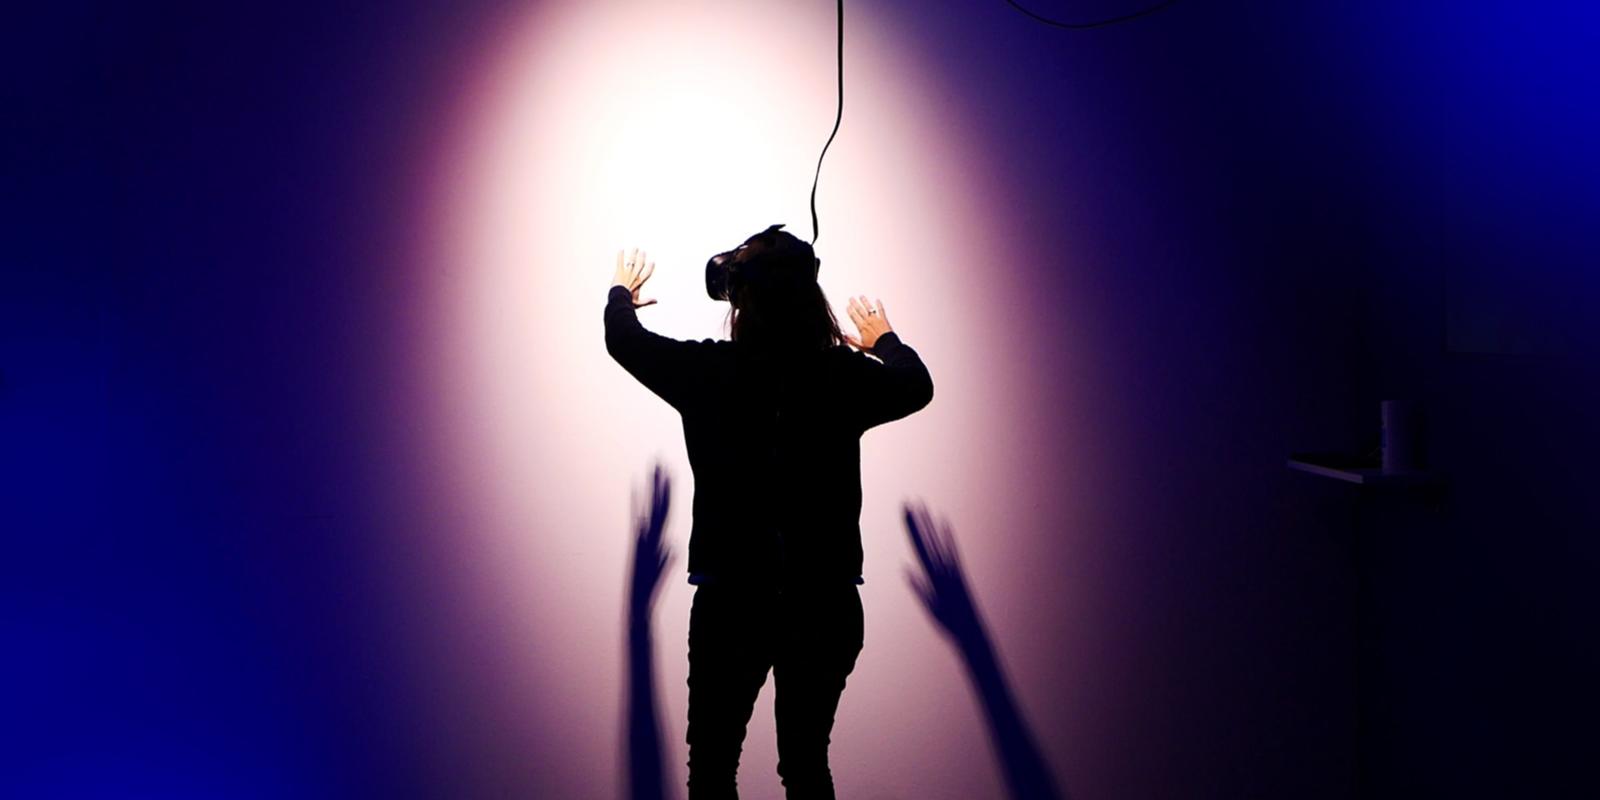 View of person from behind, facing a purple wall. Person is wearing a VR set on their face and has arms outstretched towards the wall.